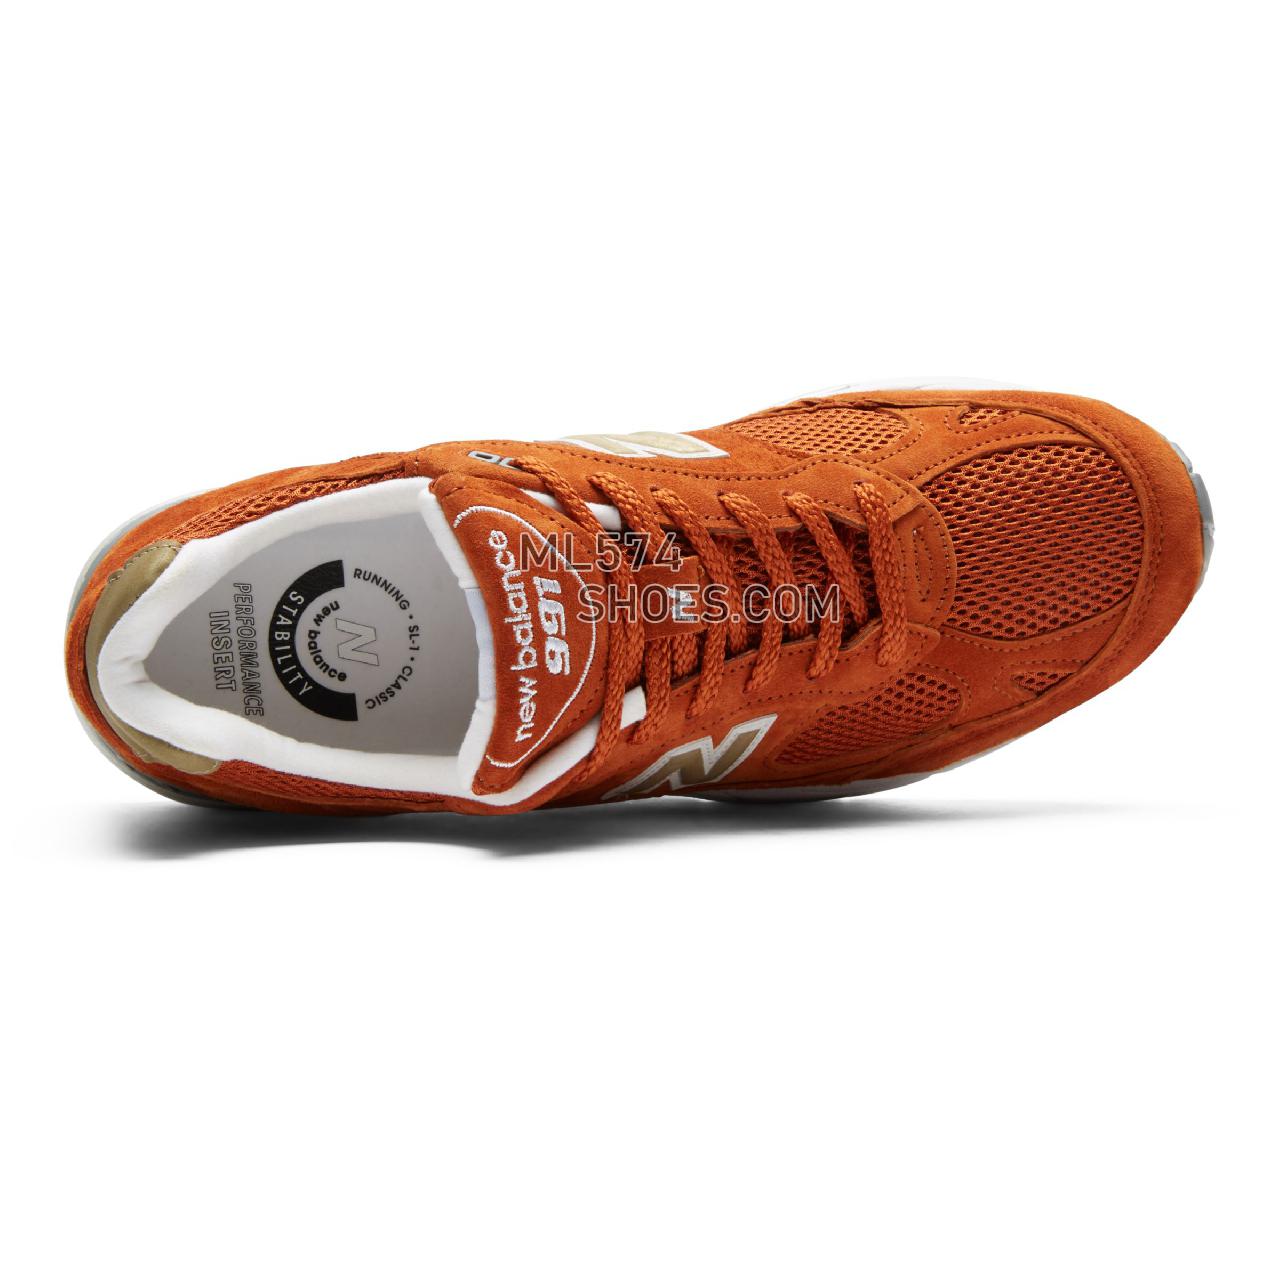 New Balance Made in UK 991 - Men's 991 Made in UK Classic M991-MP - Burnt Orange with Gold - M991SE